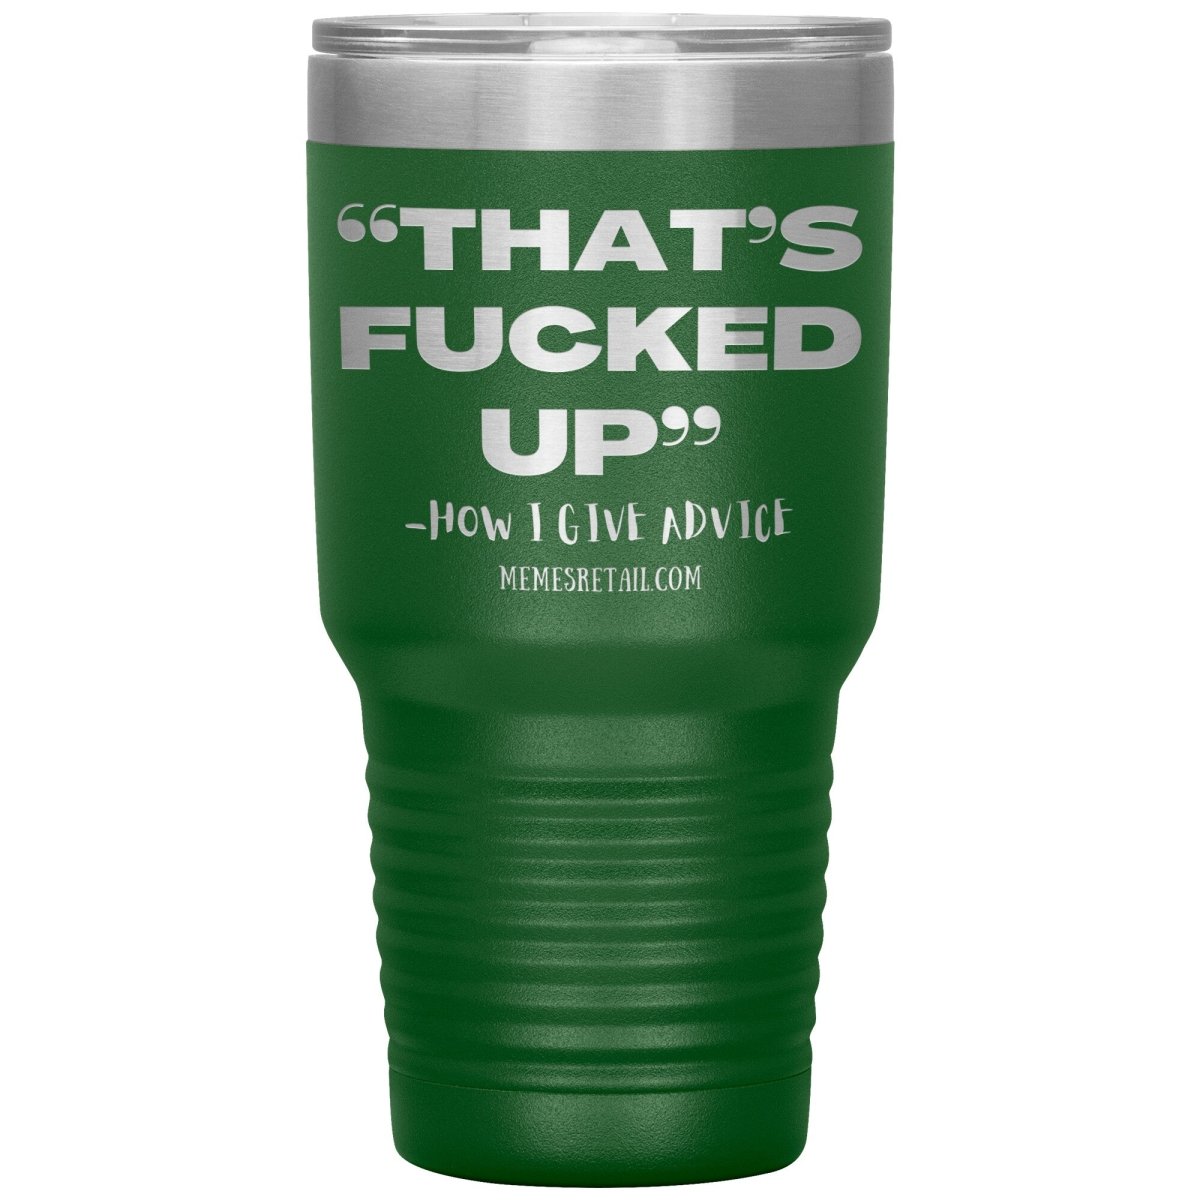 “That’s Fucked Up” -how I give advice Tumblers, 30oz Insulated Tumbler / Green - MemesRetail.com